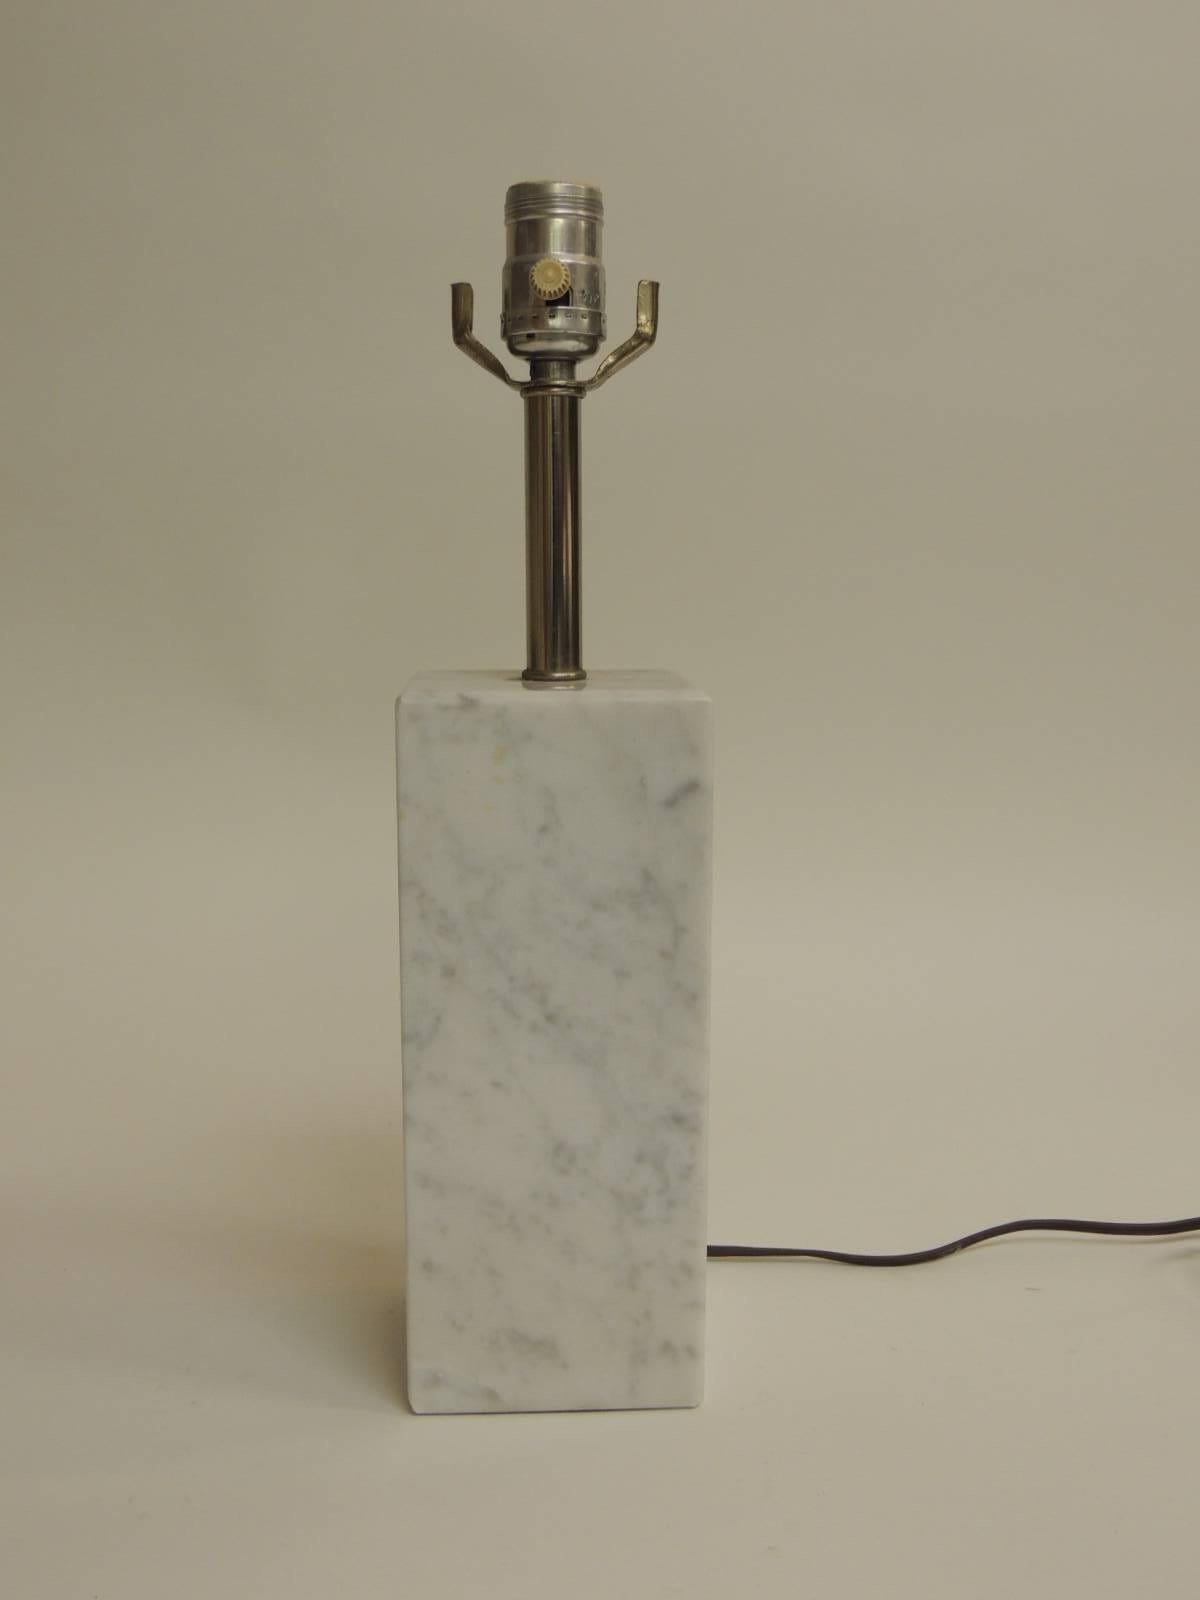 Mid-Century Modern architectural square marble column table lamp by Rob Johns Gibbons. 
Grey marble mid-century with chrome fittings vintage lamp. No harp or shade
Measures: 4 x 4 x 16 H
4 x 4 x 9.5 base
Weight 30 pounds.
    